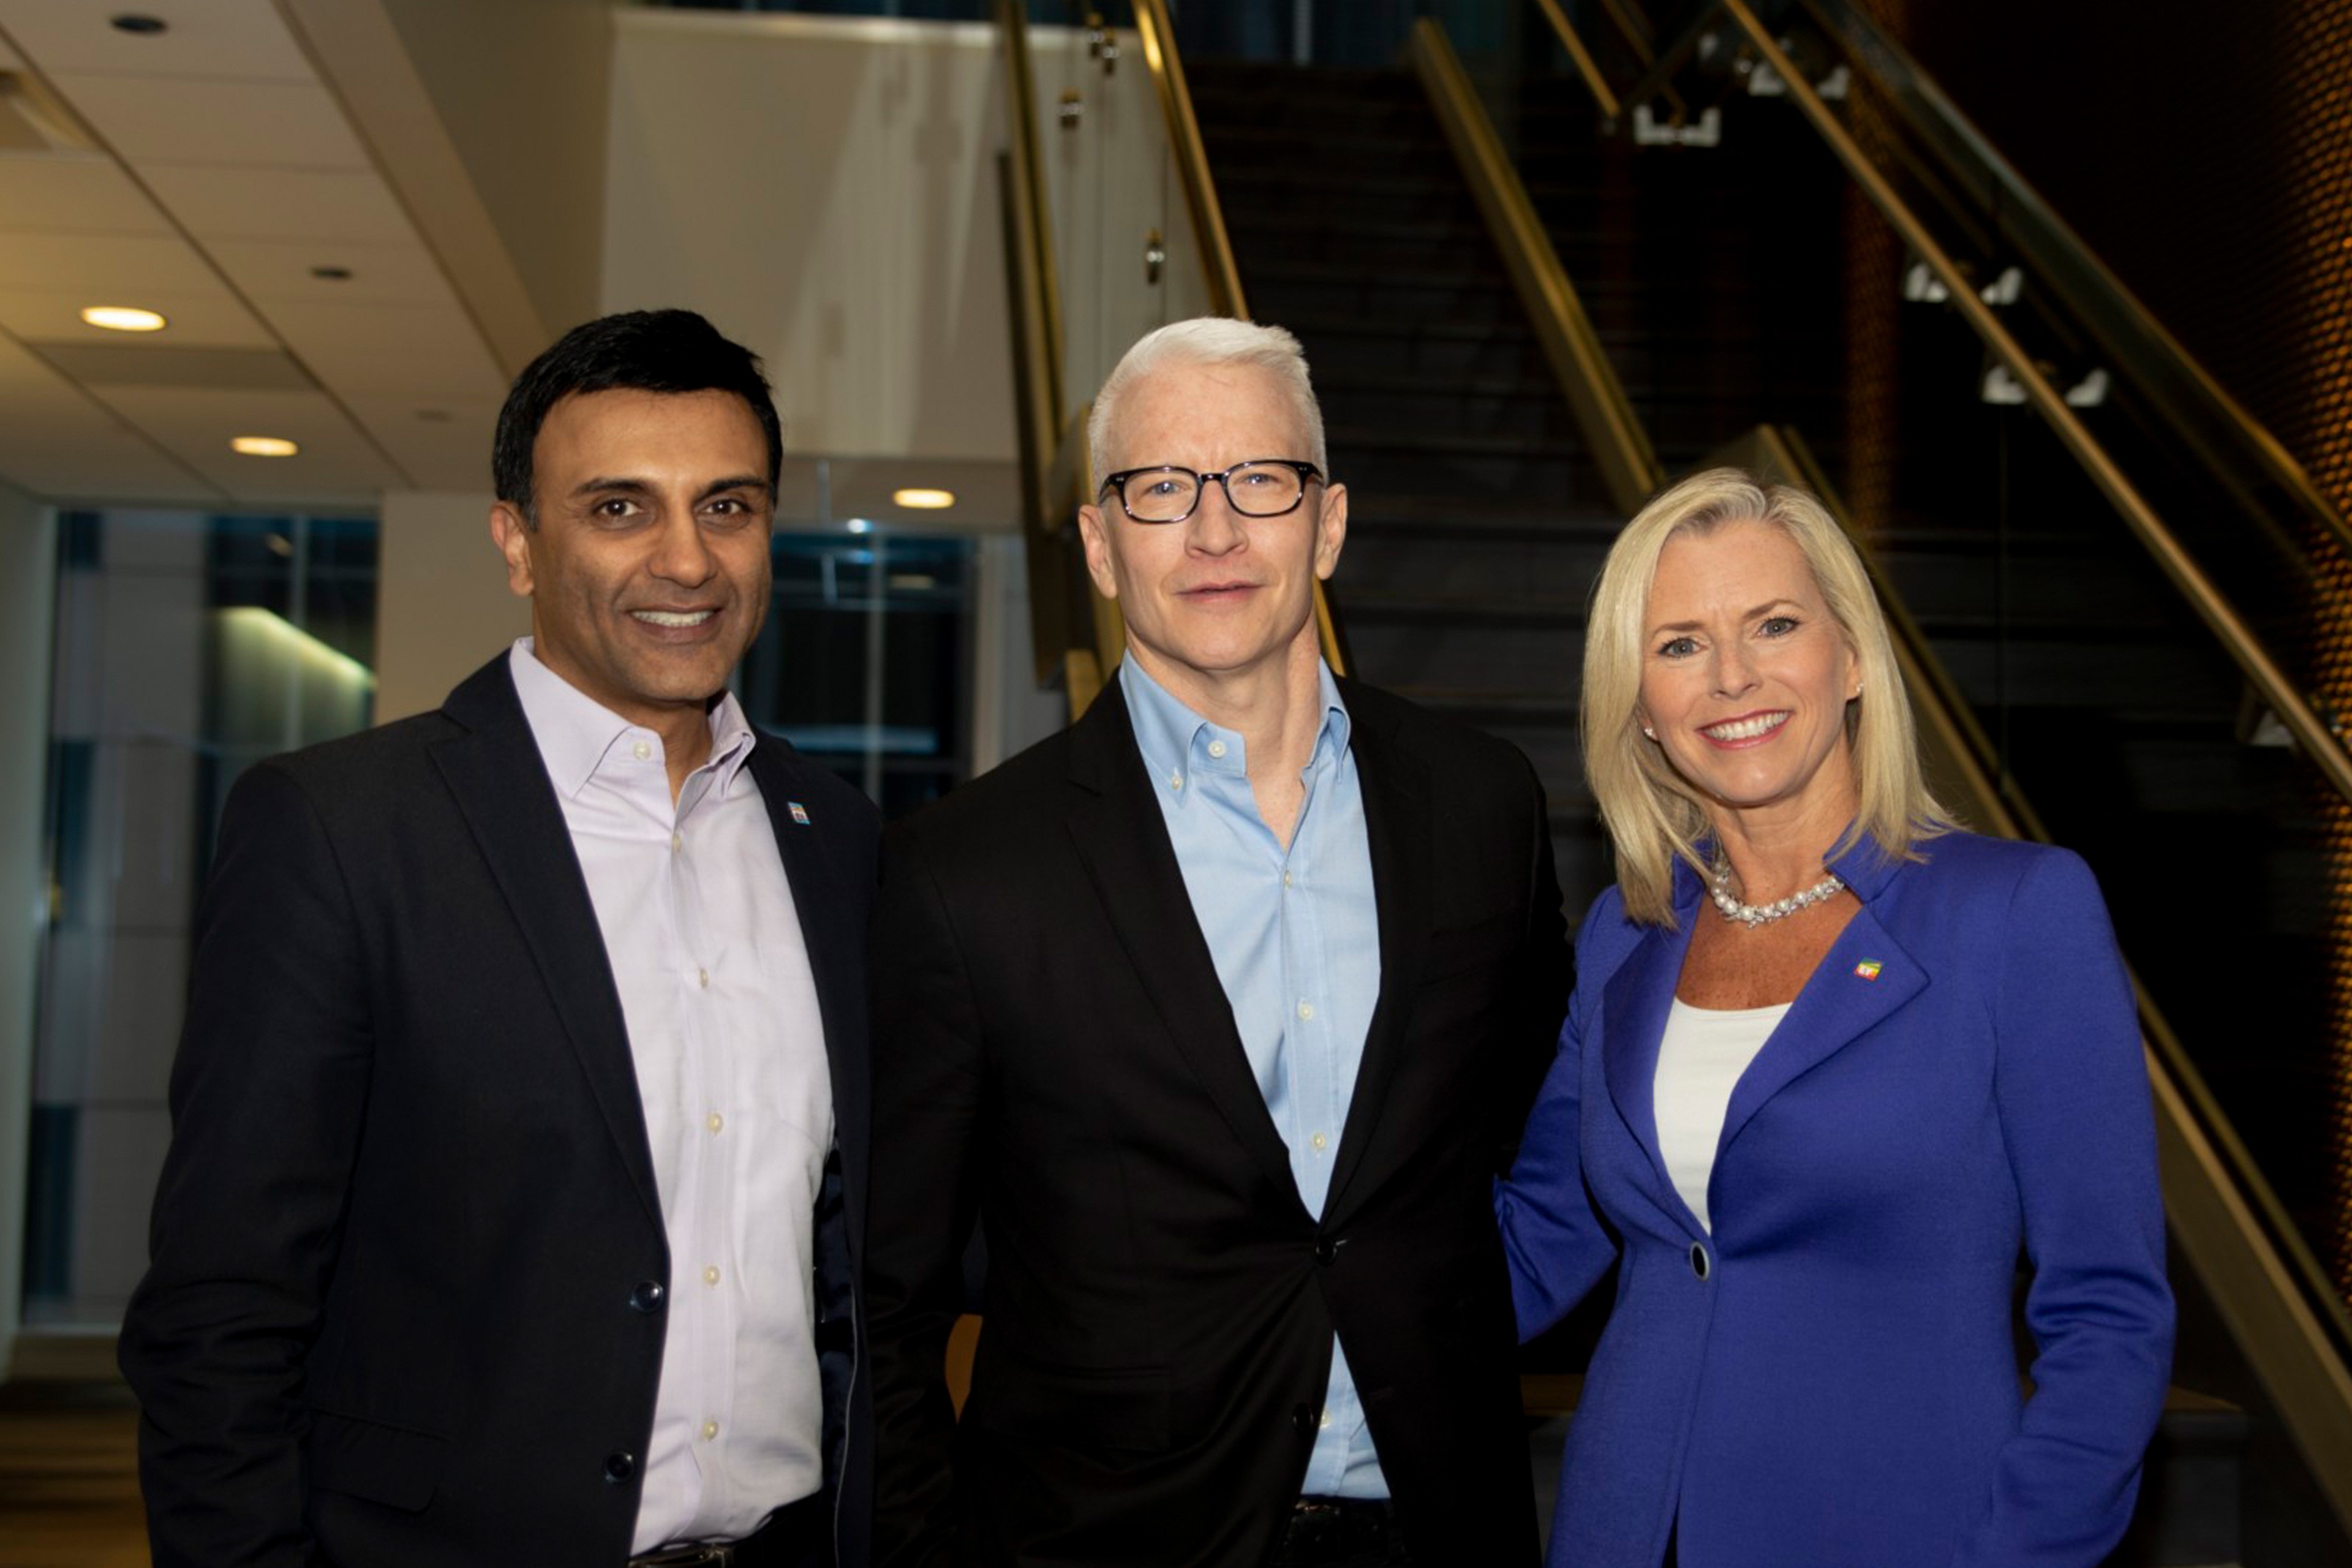 Hiren Shukla, Anderson Cooper and Kelly Grier at the filming of the news program “60 minutes.”